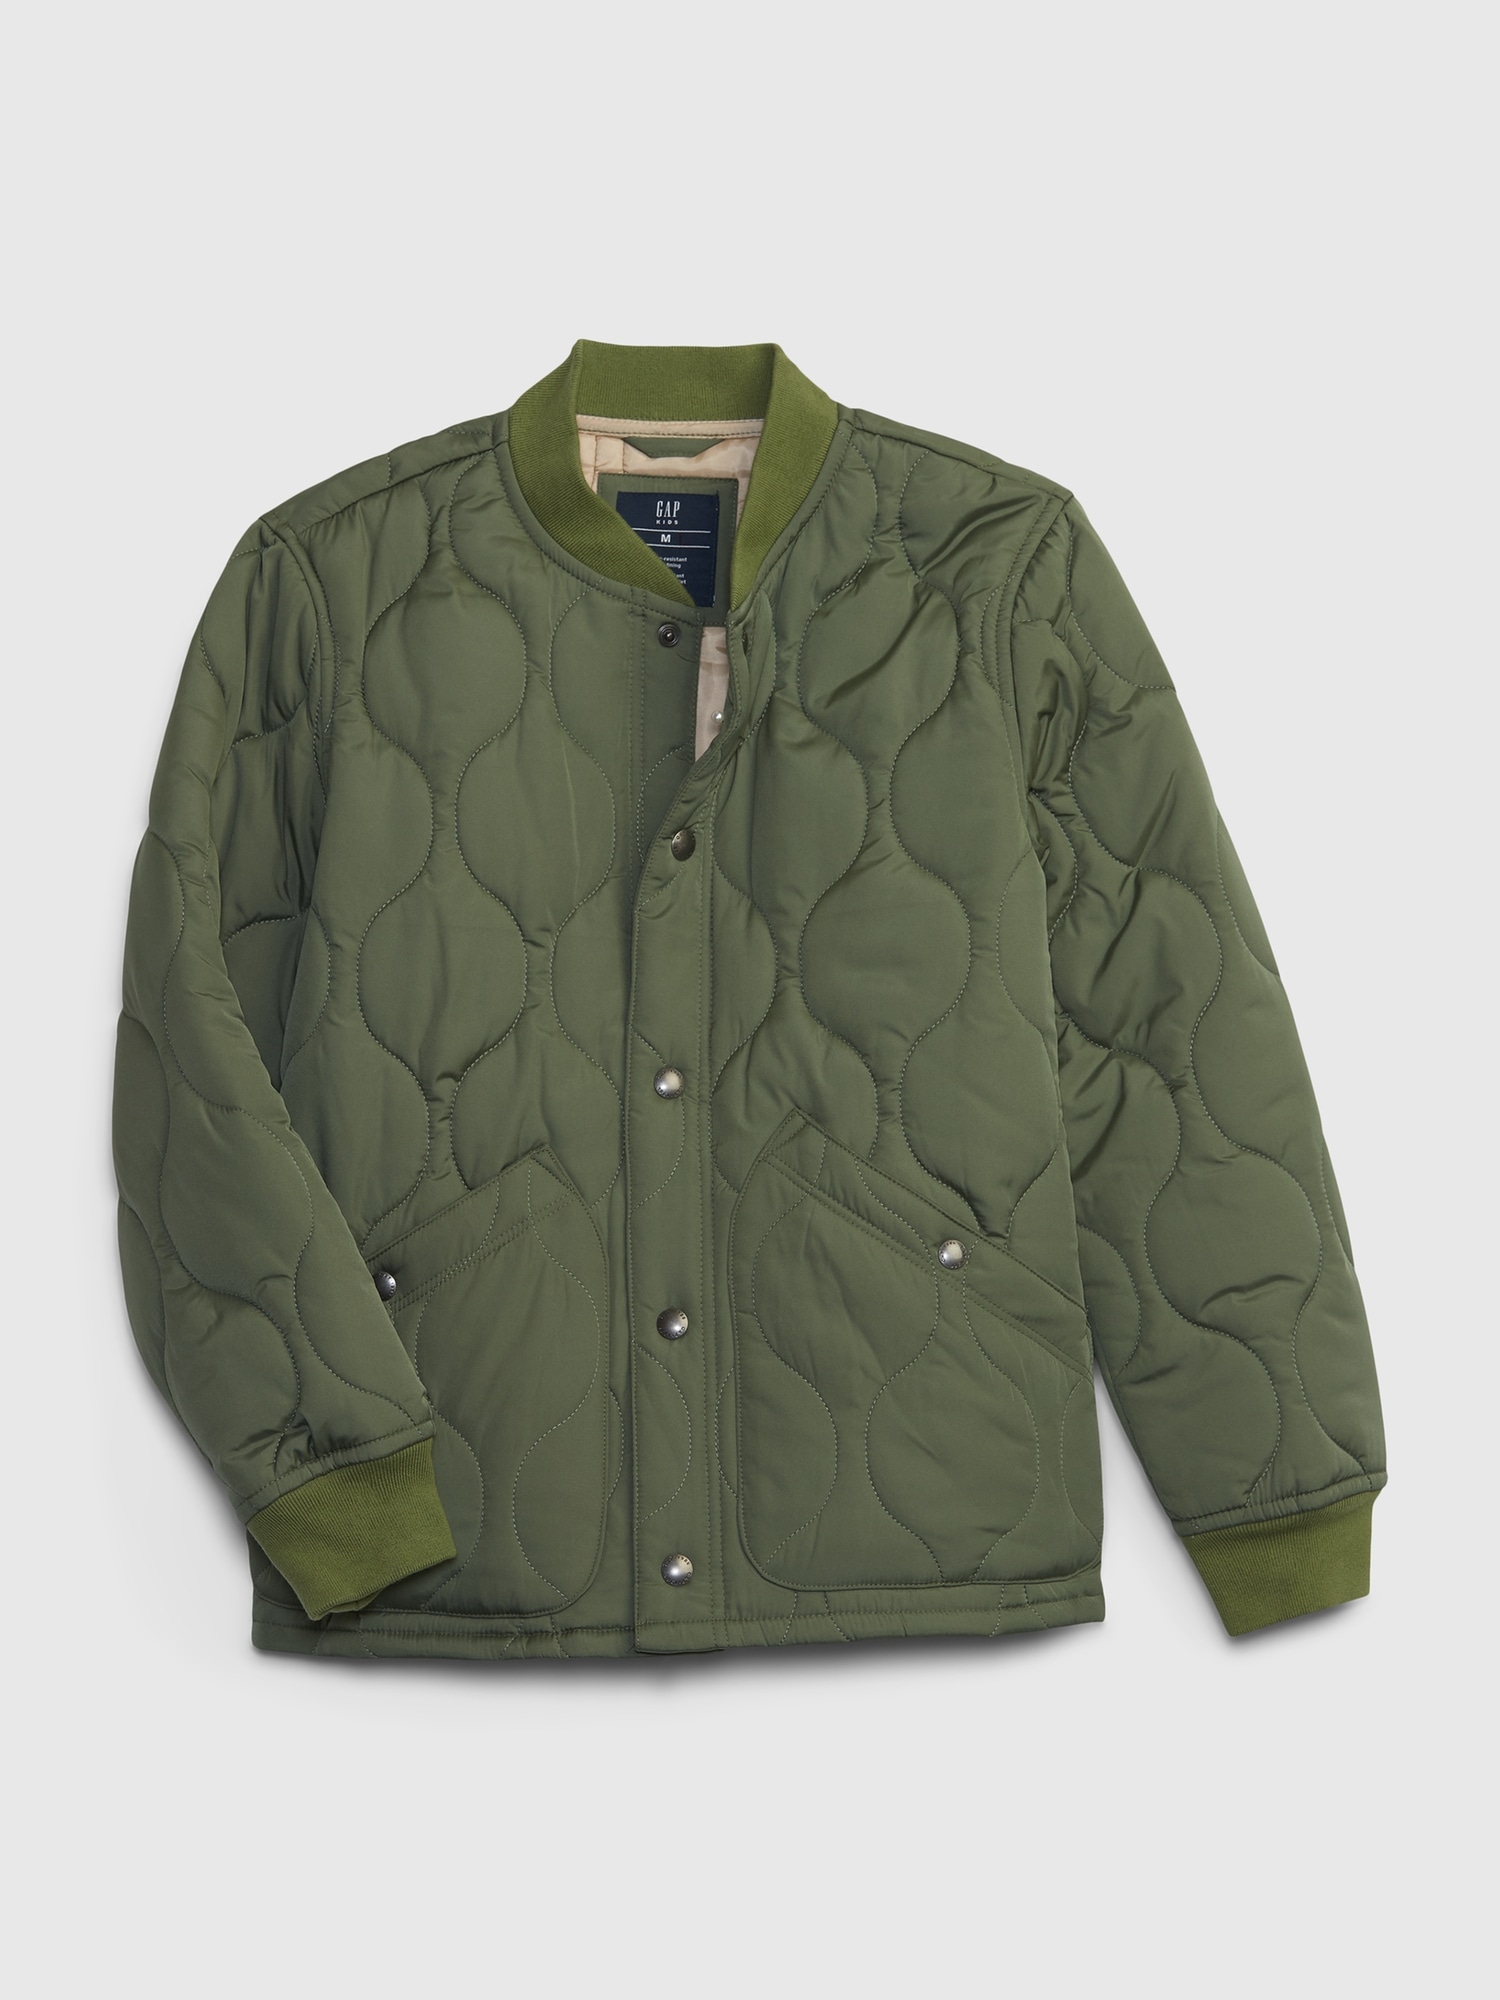 Kids Quilted Bomber Jacket | Gap